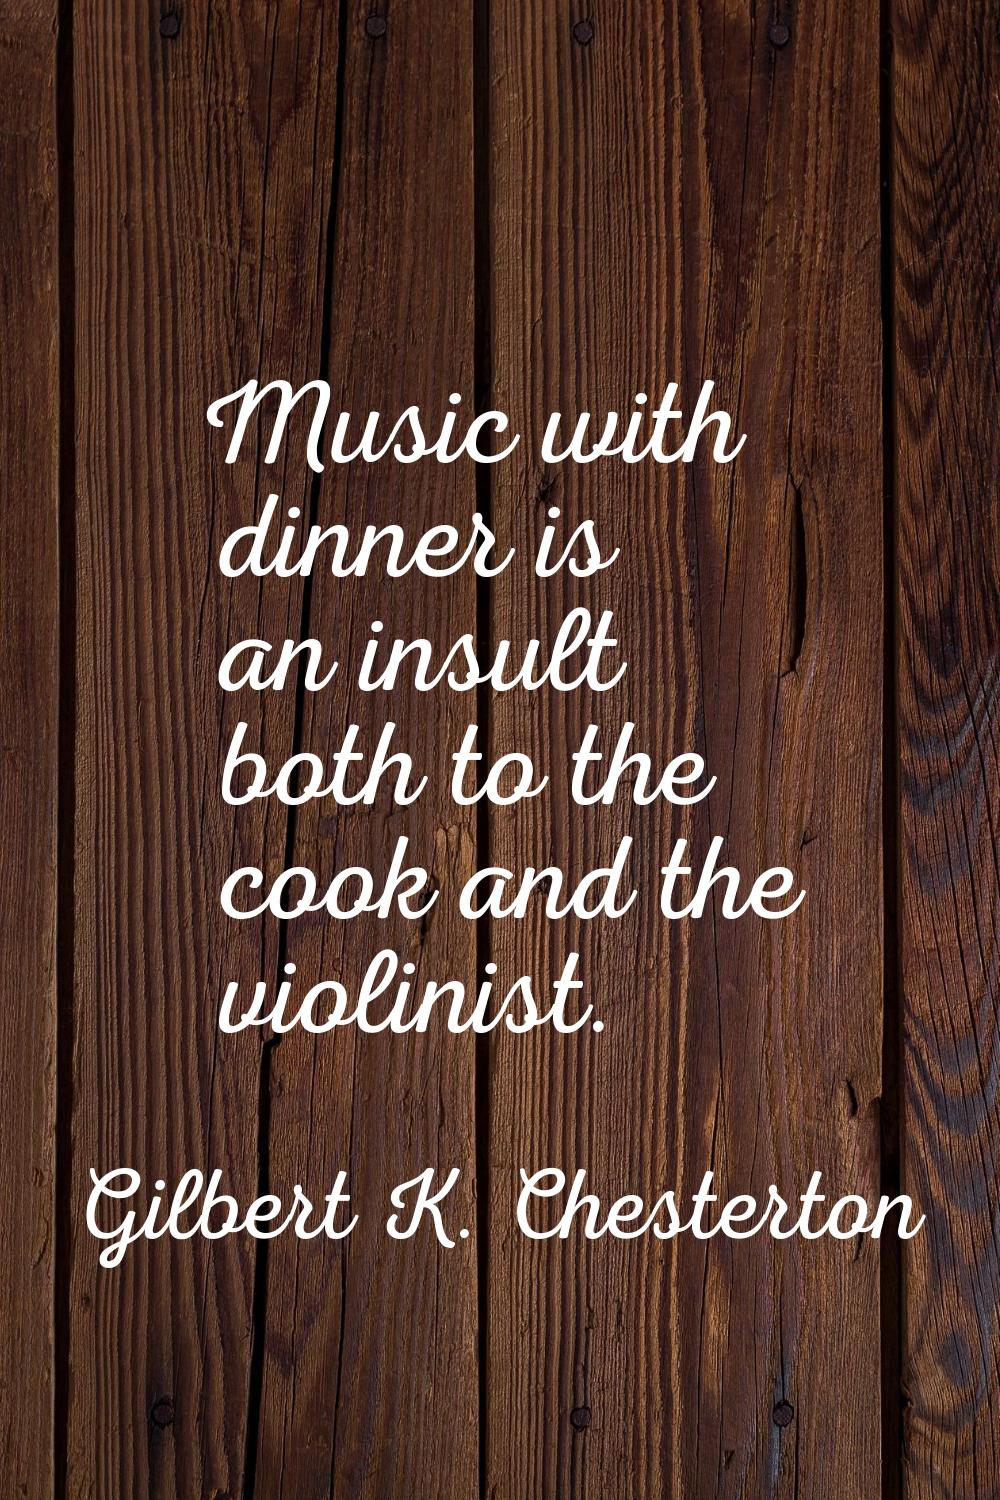 Music with dinner is an insult both to the cook and the violinist.